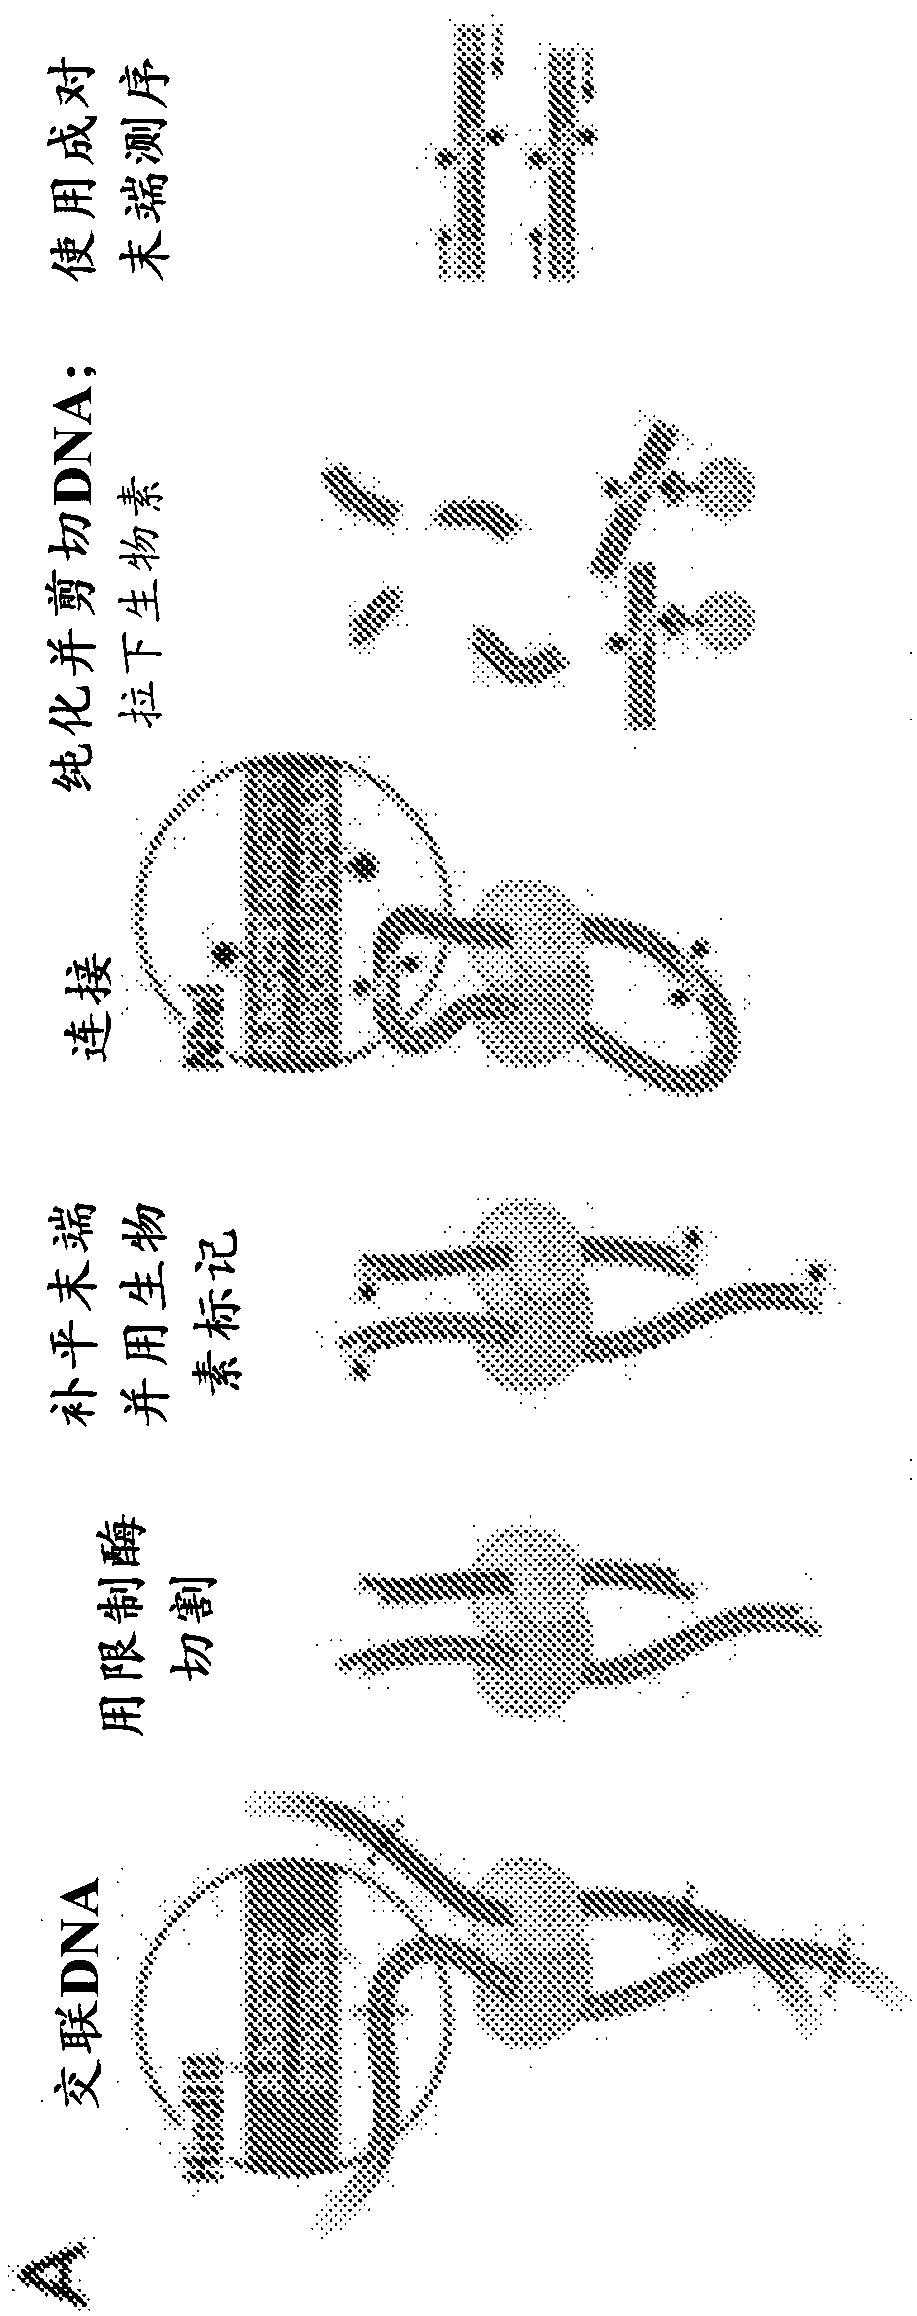 Methods for genome assembly, haplotype phasing, and target independent nucleic acid detection